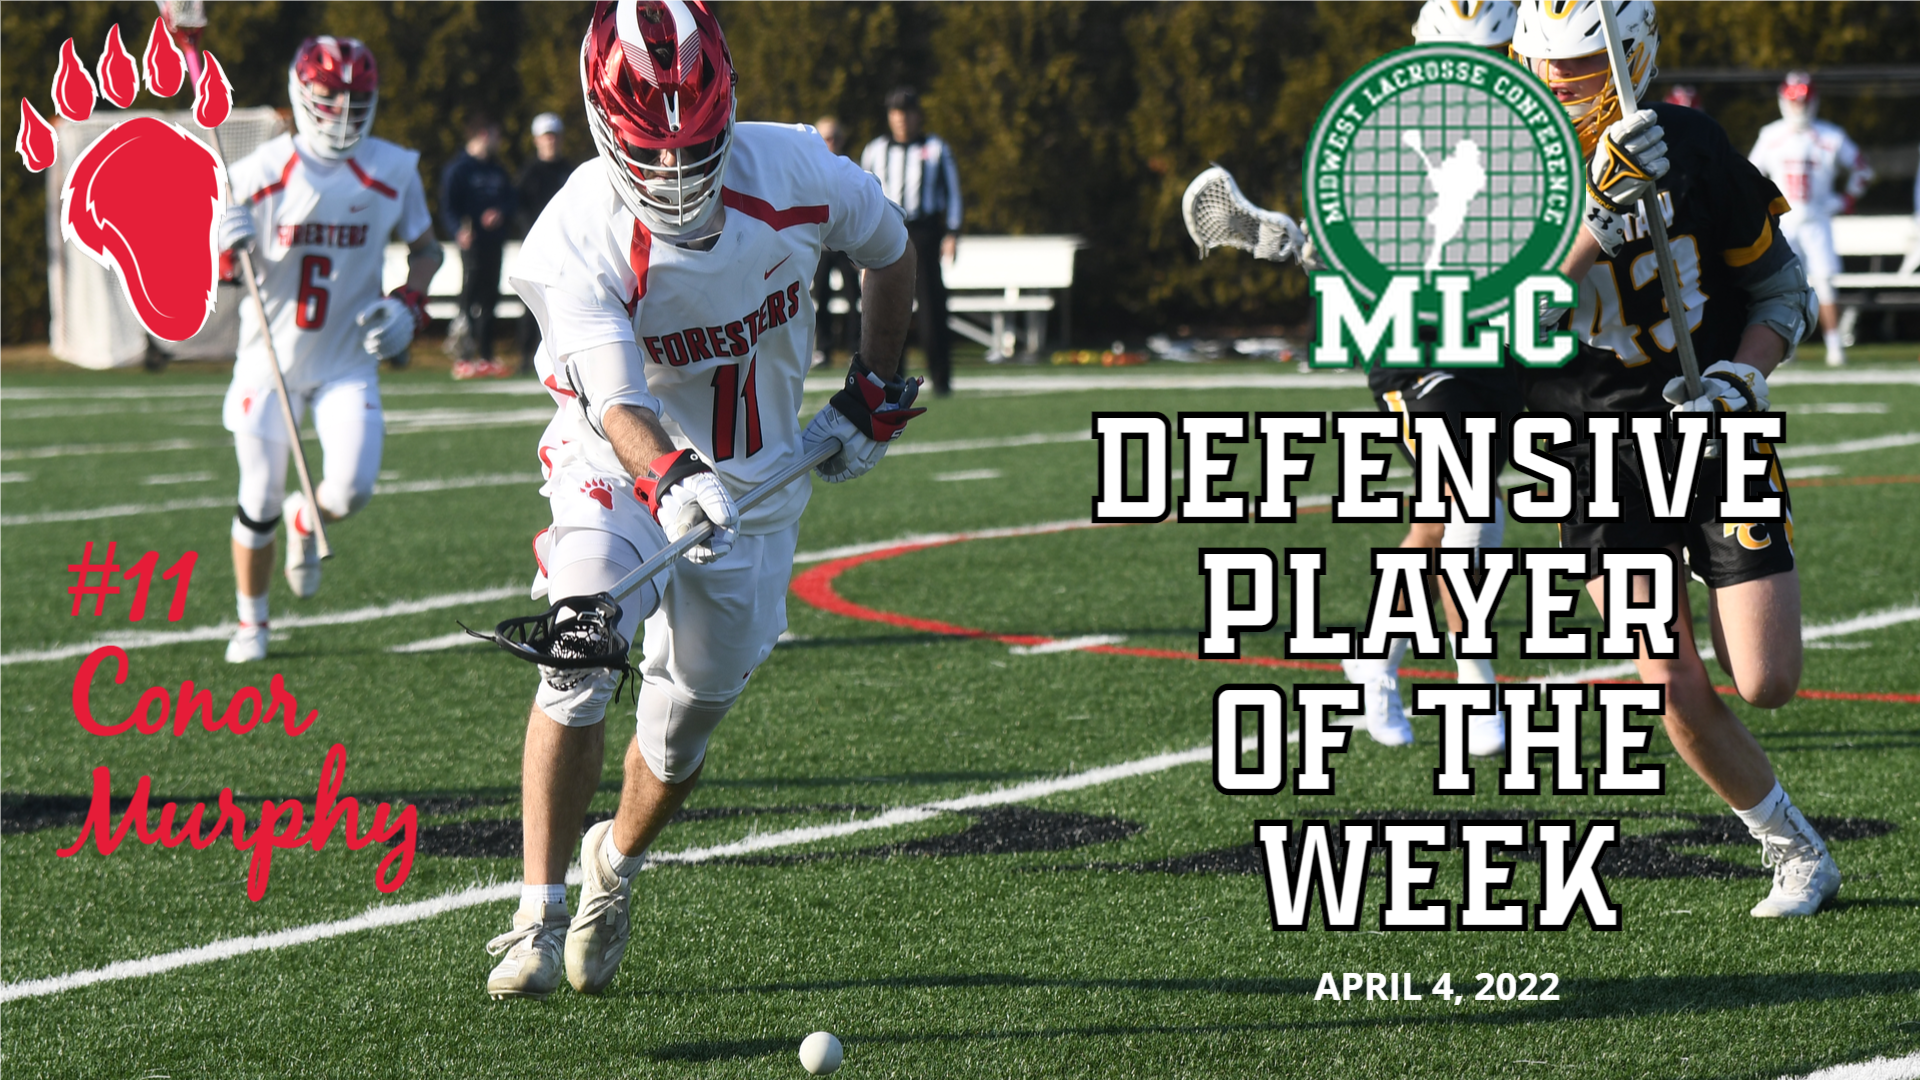 Conor Murphy Named MLC Defensive Player of the Week